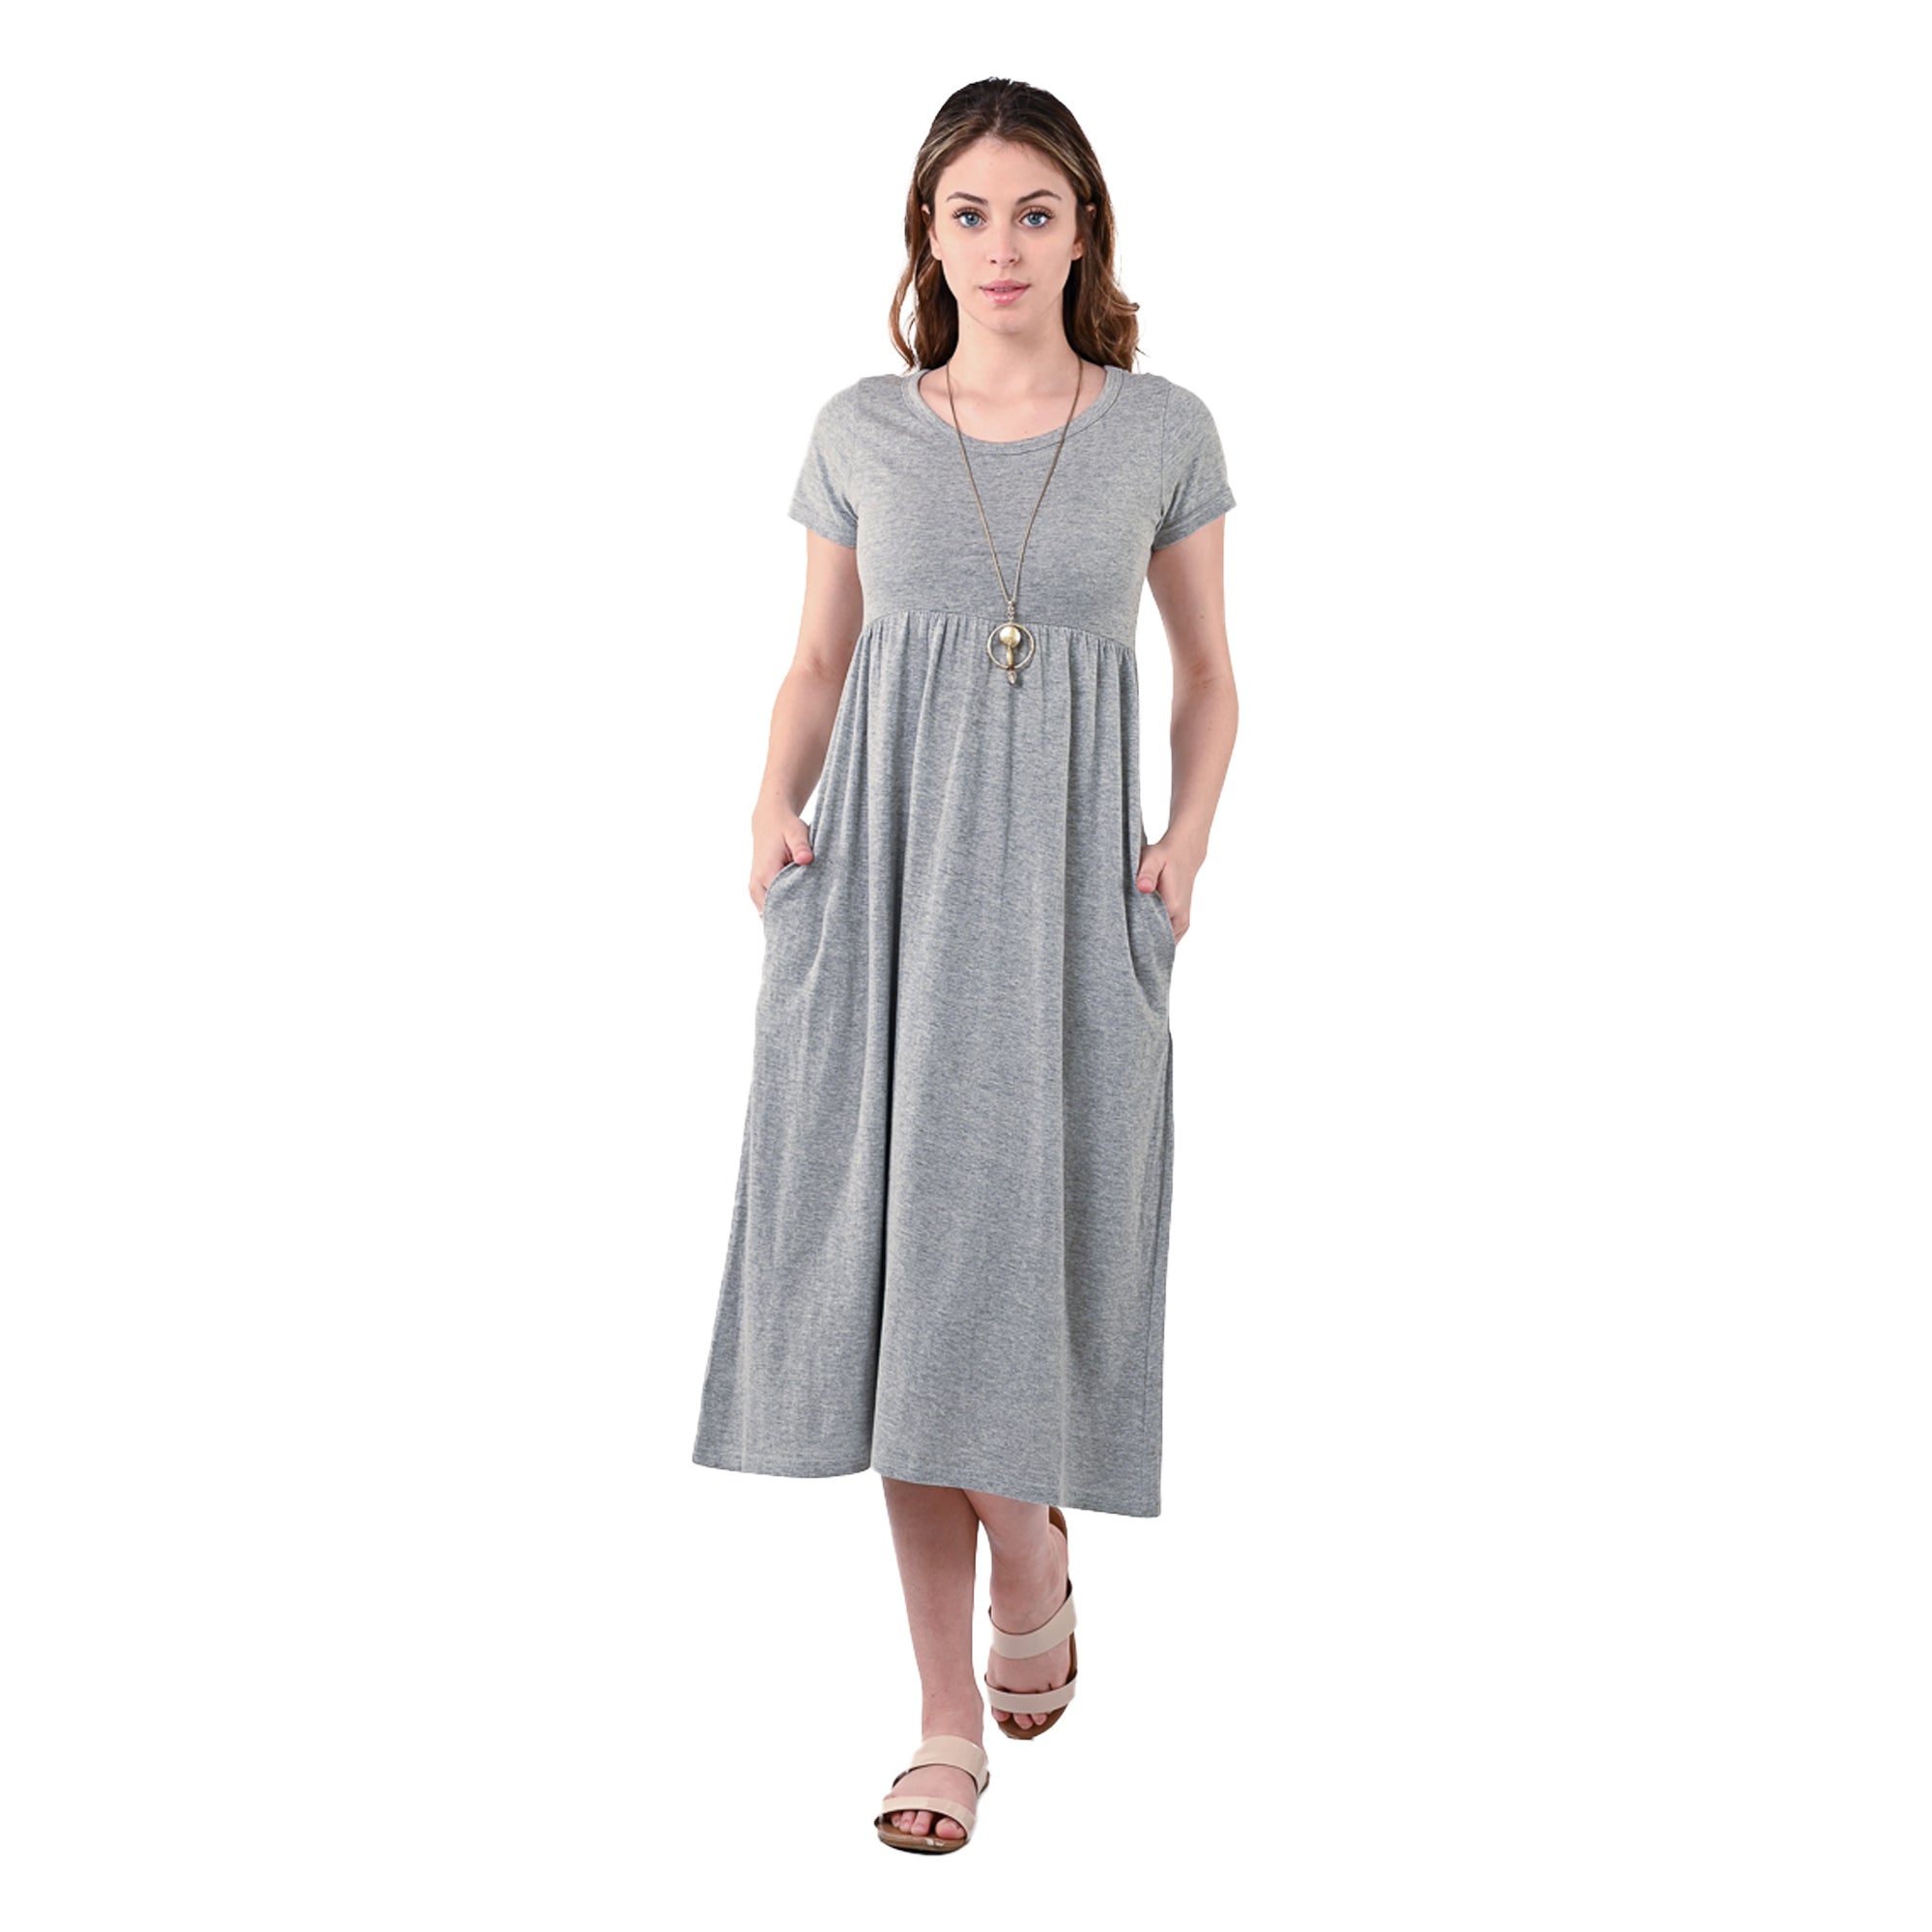 USBD Premium Cotton Made Maxi Dress with Pockets Waisted Casual Long Maxi Dress